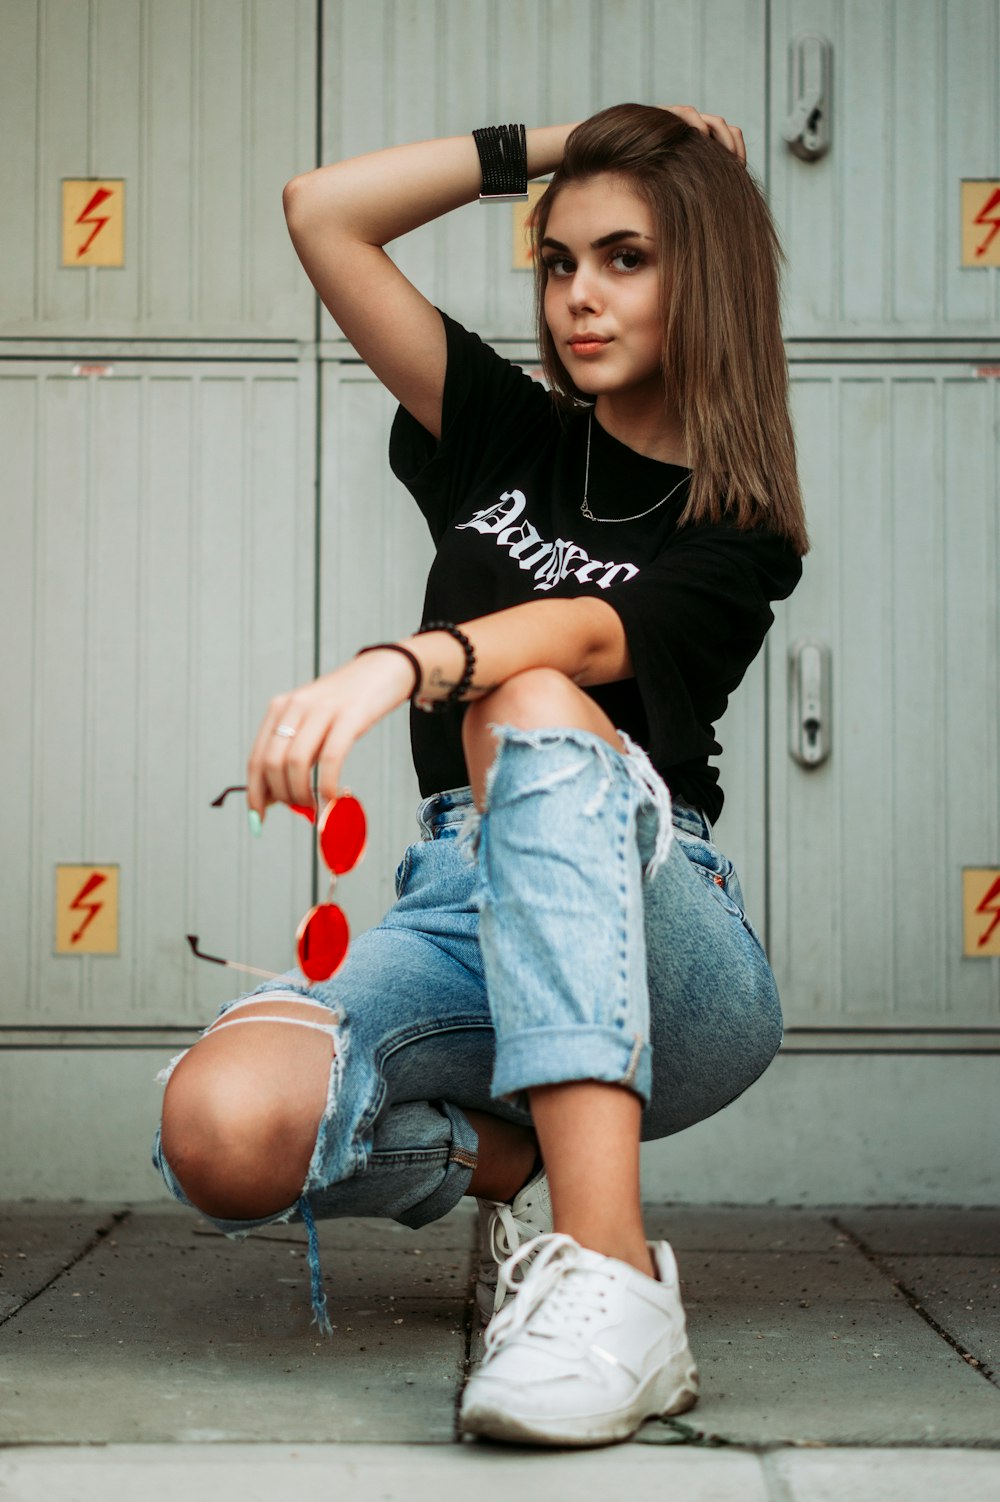 woman in black t-shirt and blue denim shorts sitting on gray concrete floor